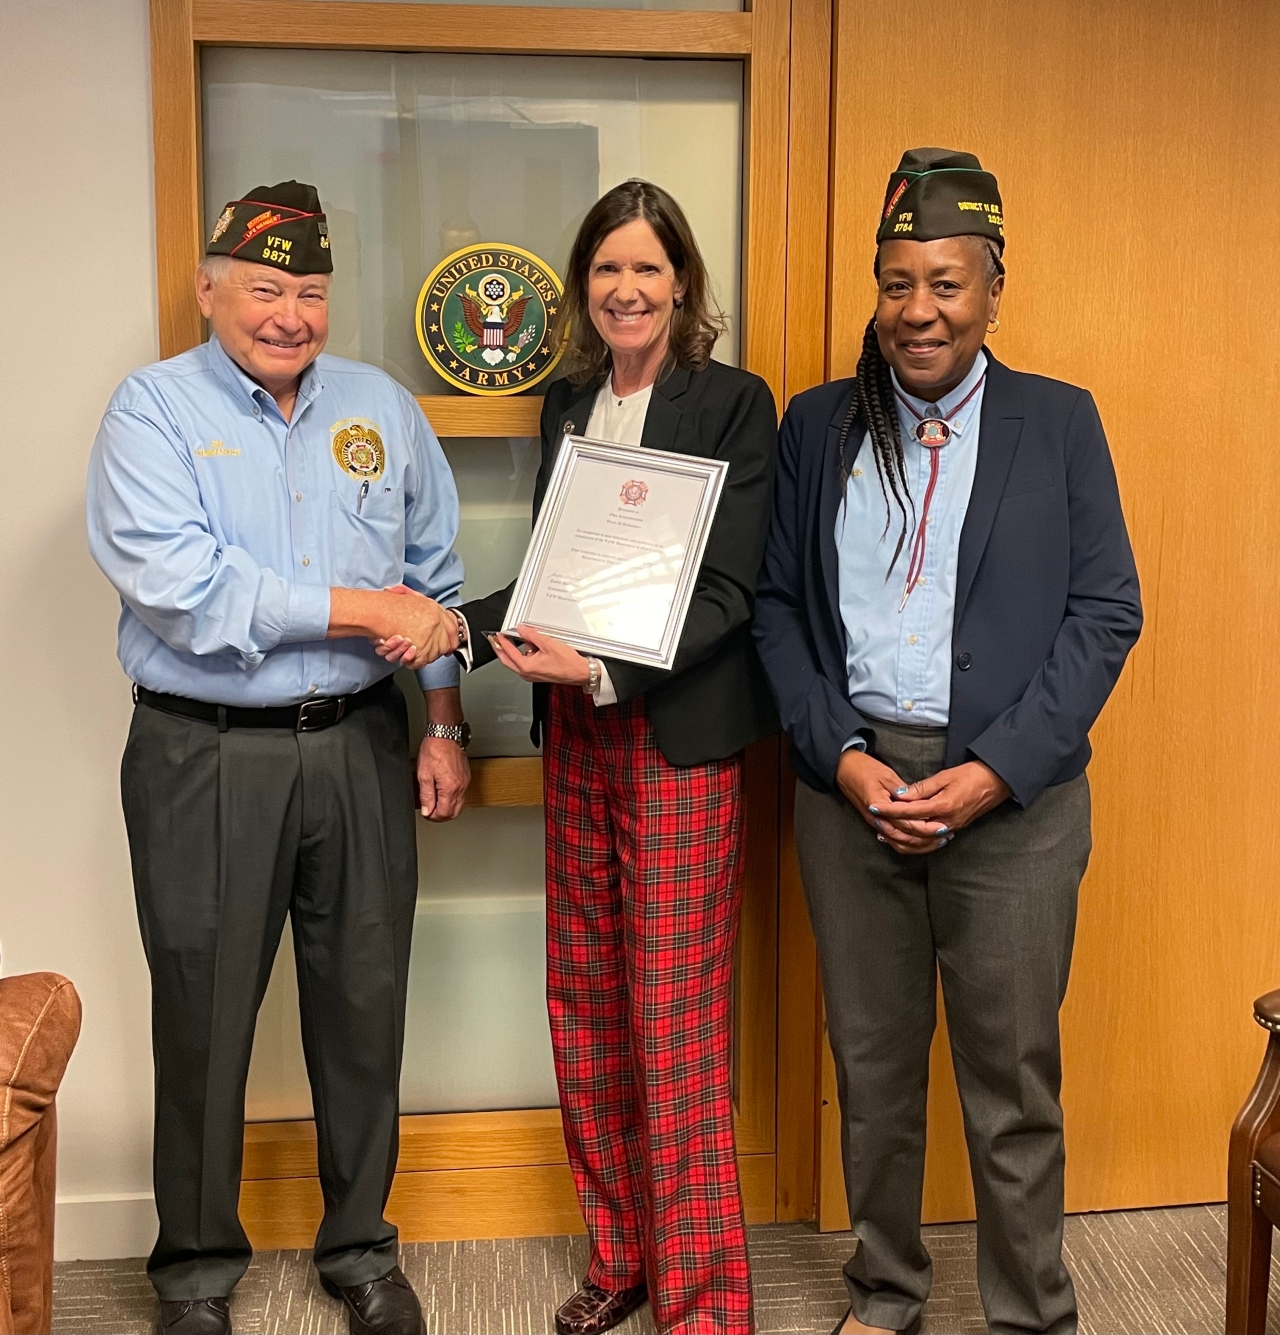 Representative Richardson was honored to receive an award from State Commander James Hordinski and Iris Foster from the Ohio VFW